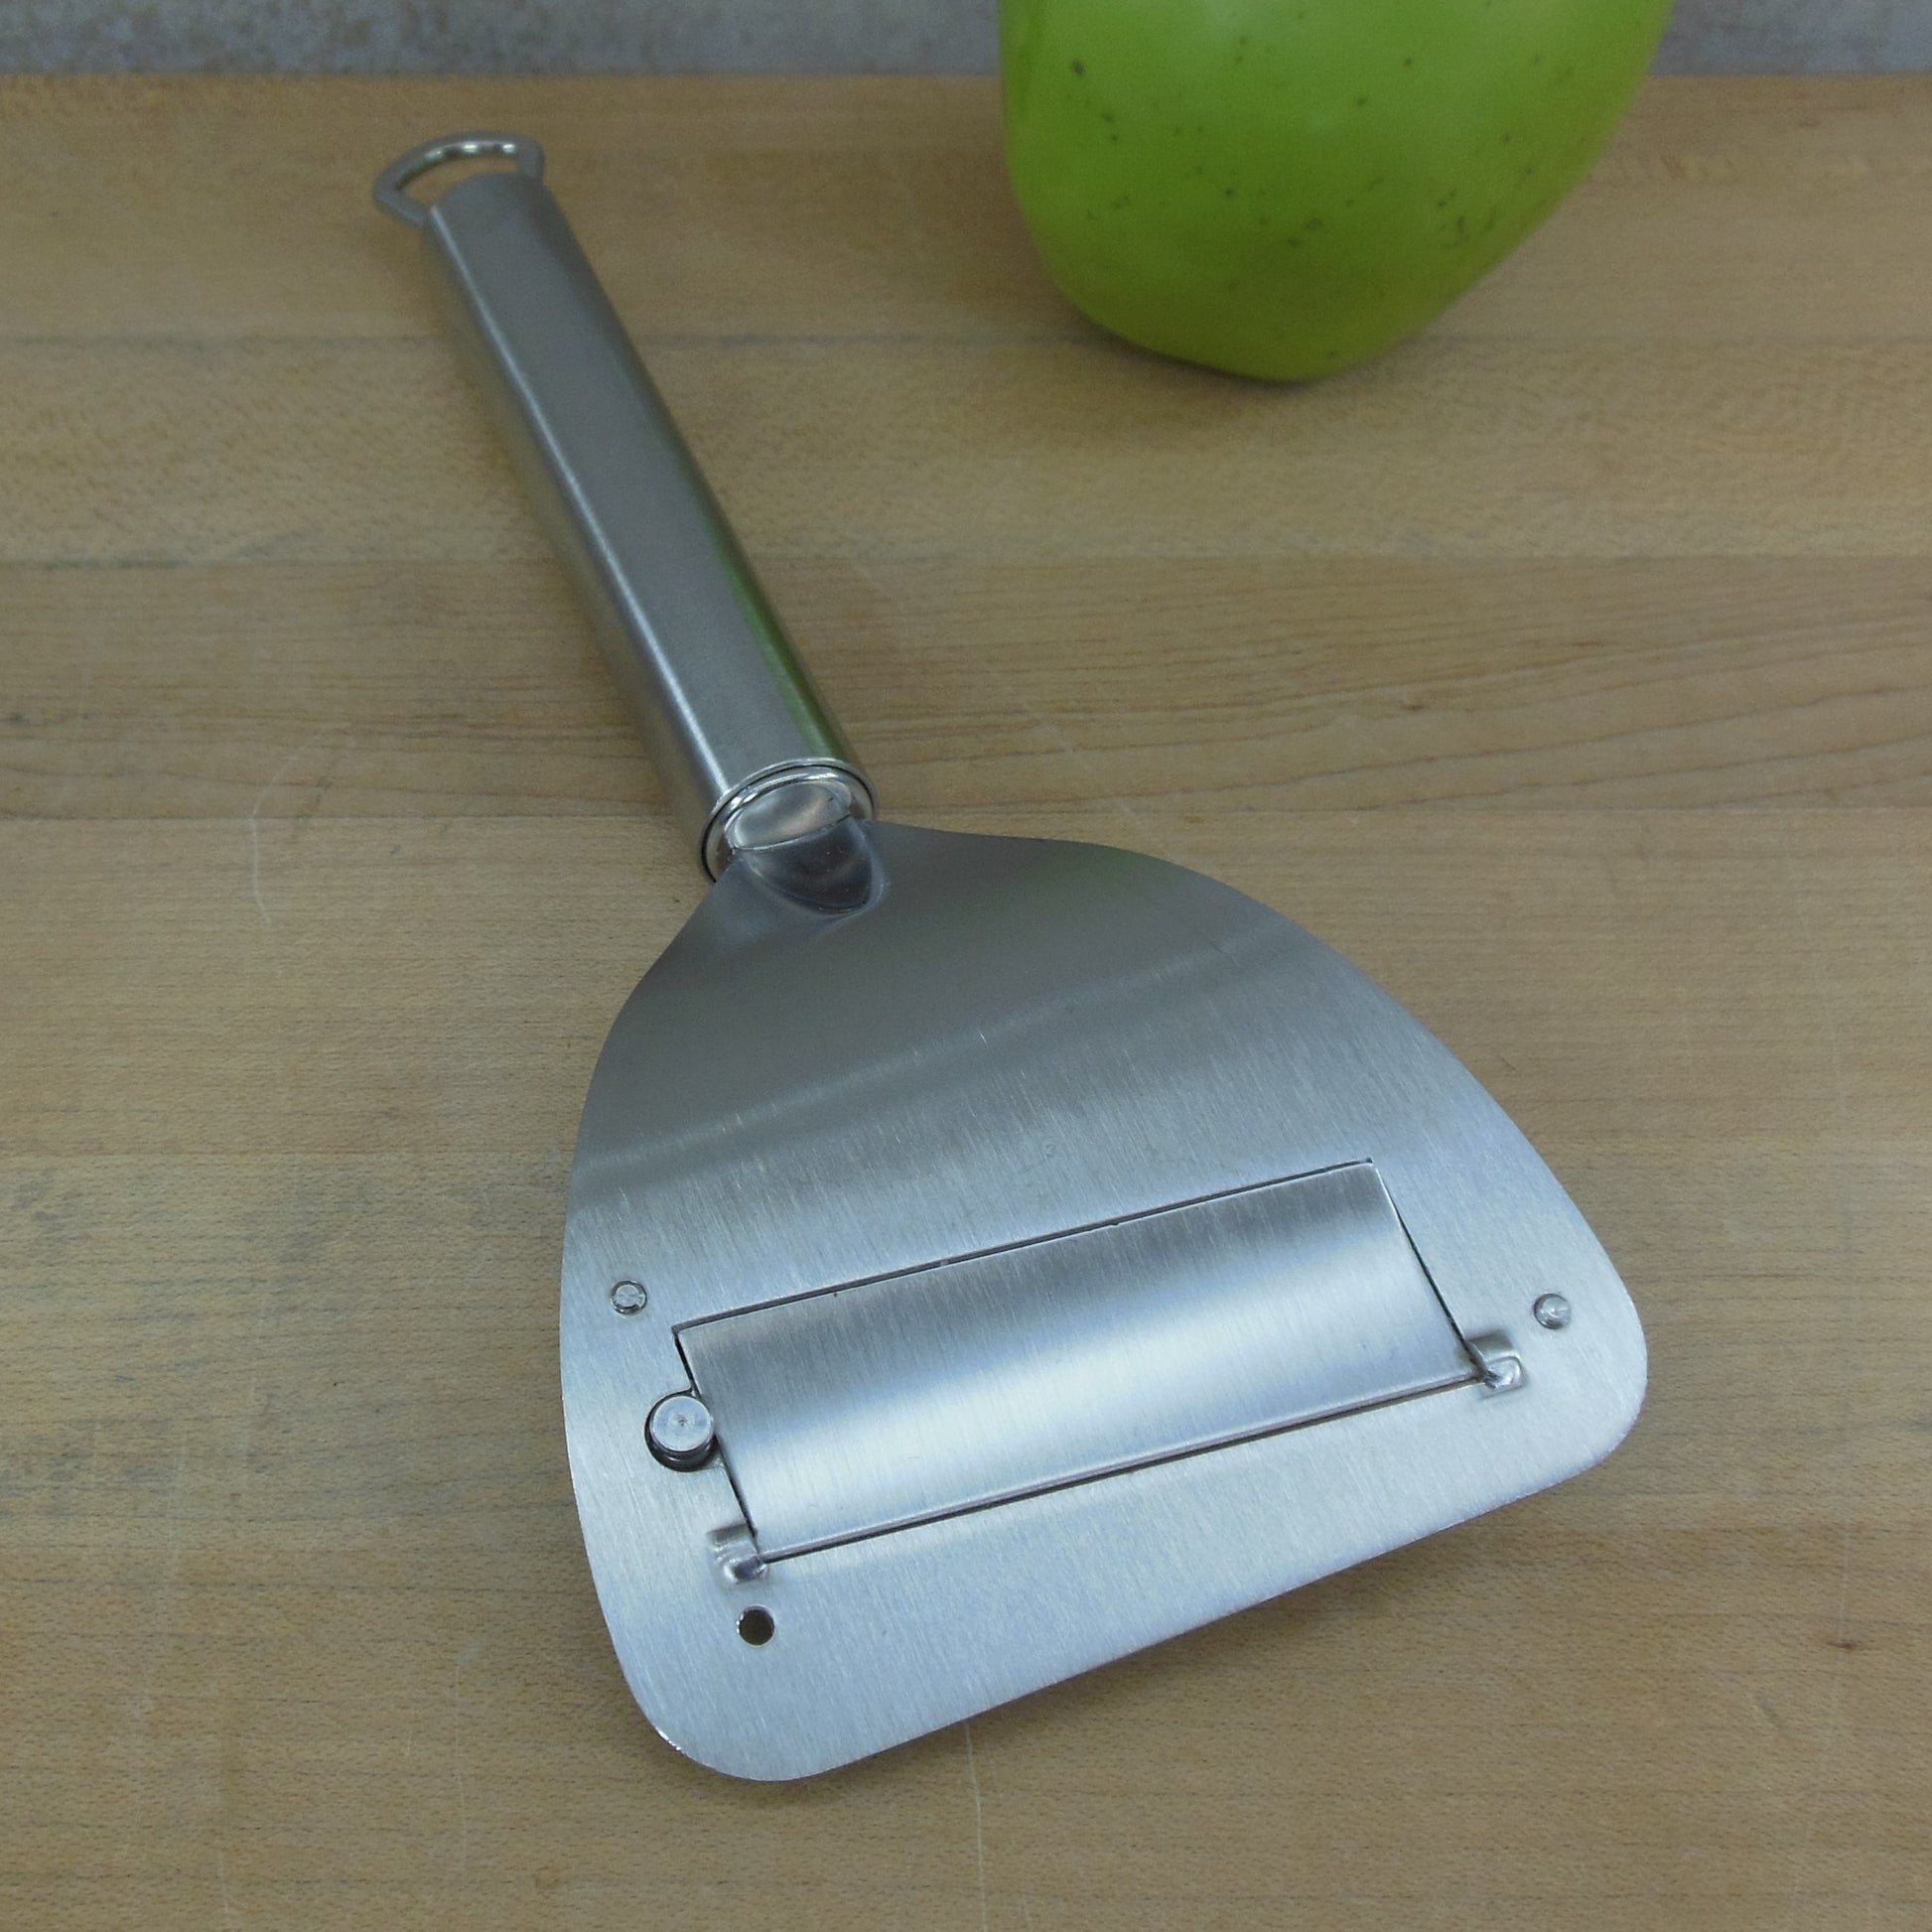 WMF Profi Plus Stainless Adjustable Cheese Butter Slicer Plane used